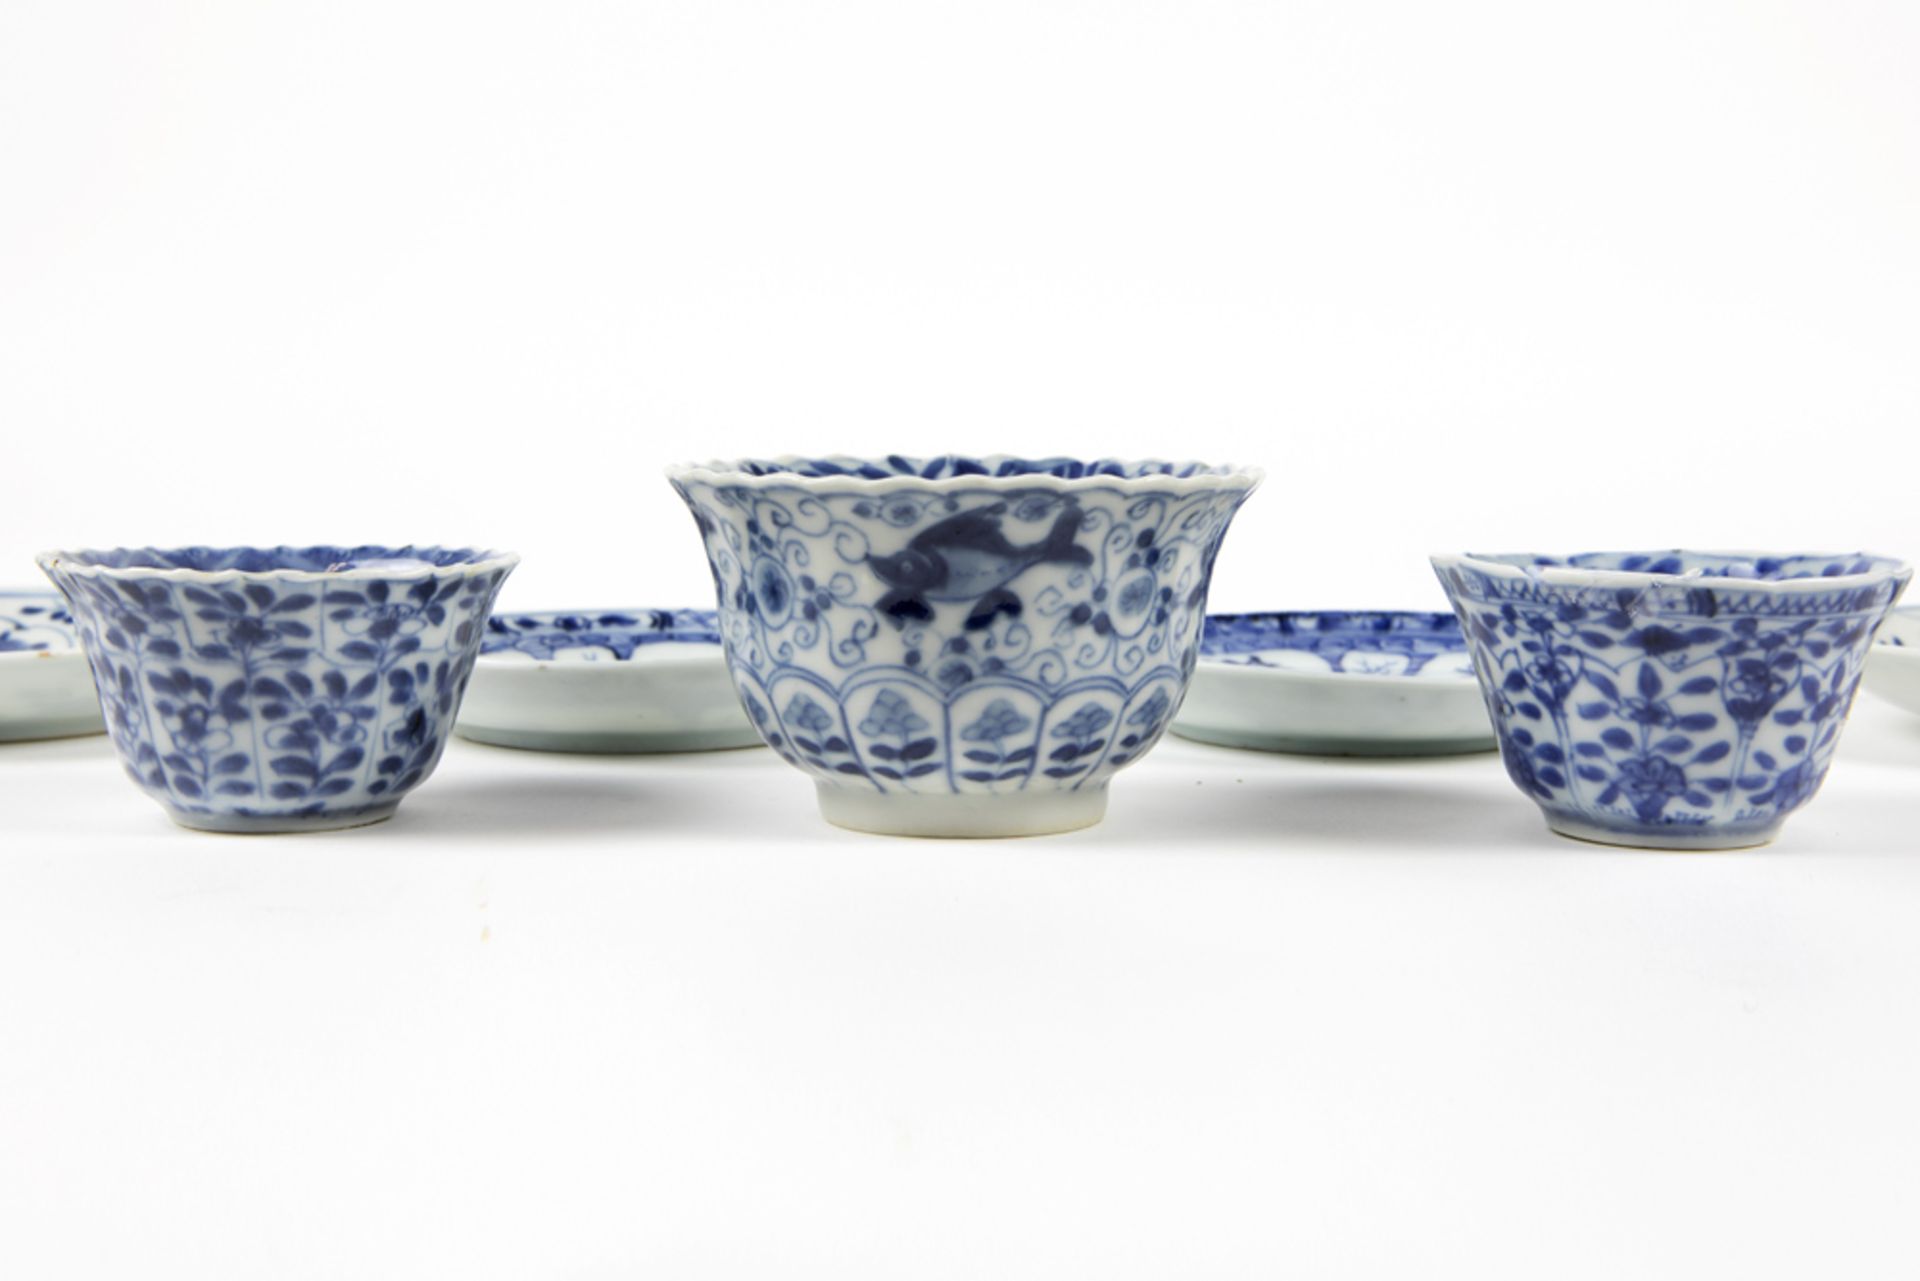 eight pieces of 18th Cent. Chinese porcelain with blue-white decors : five small plates and three - Image 3 of 3